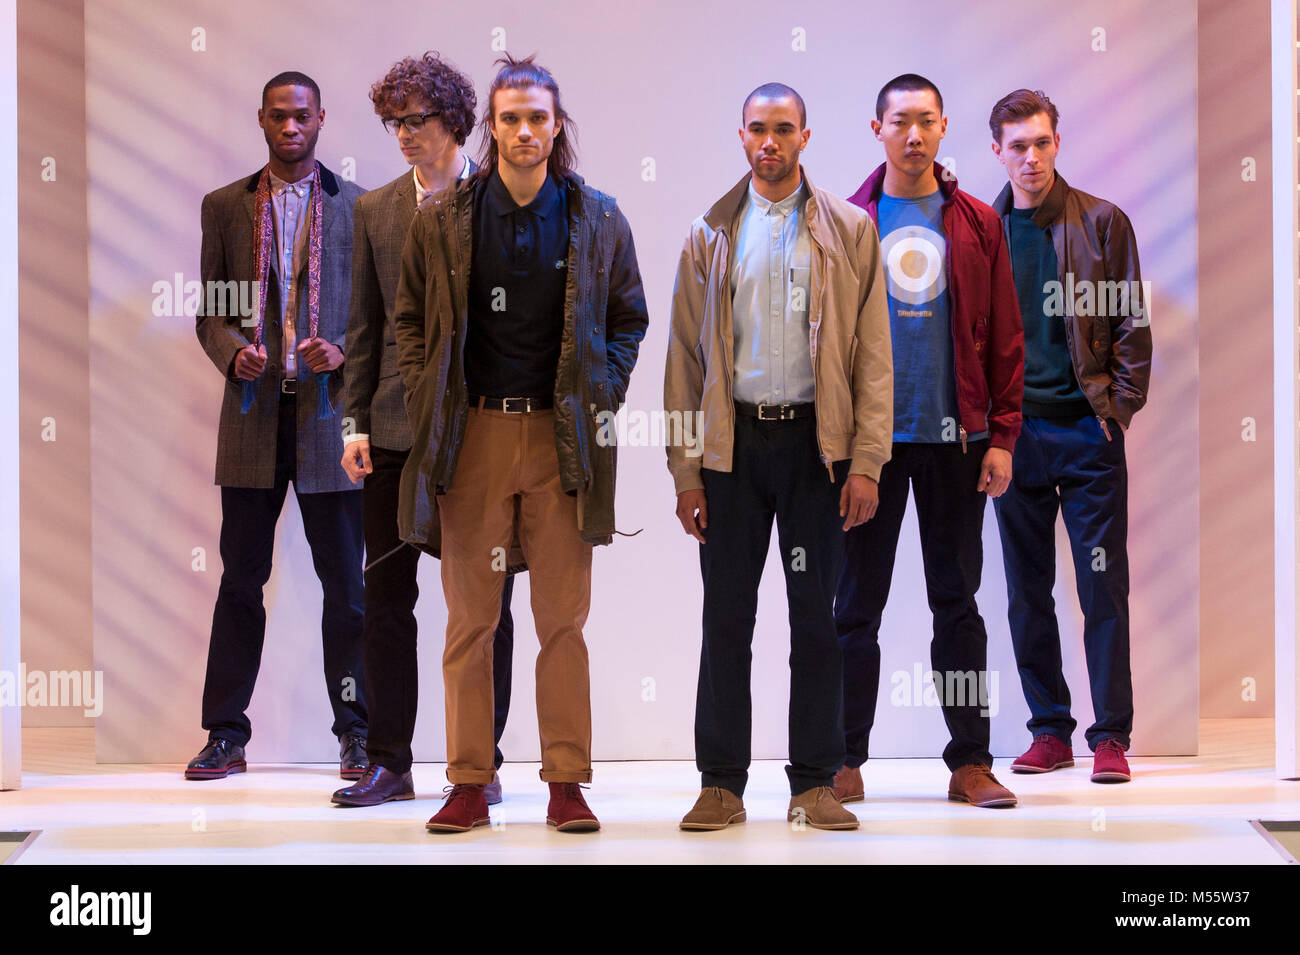 Male models on the menswear catwalk wearing designs by Lambretta at Moda.The trade fashion show ran 18th-20th February 2018 at the NEC, Birmingham, UK. Key trends highlighted for Autumn/Winter 2018 included red and burgundy, often in conjunction with black, and a major return for leopard print. Three separate catwalk shows, Moda Directions, Moda Gent, and Moda Woman, took place every day. Four halls of womenswear, accessories, menswear, and footwear kept fashion buyers from the UK and abroad busy choosing their ranges for later in the year.  Credit: Antony Nettle/Alamy Live News Stock Photo